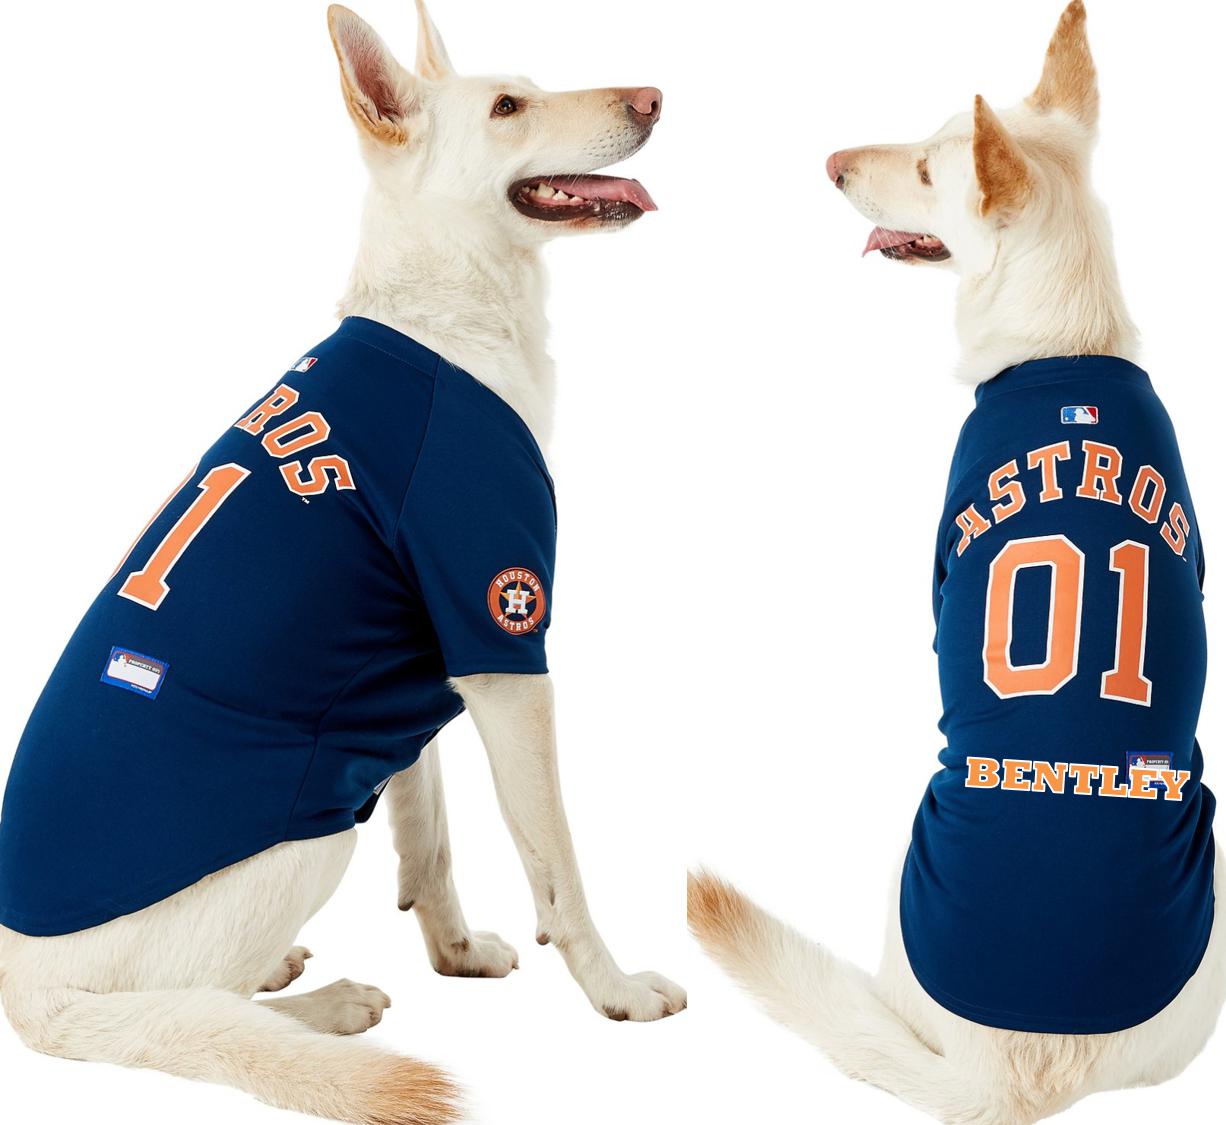 astros jerseys, astros jerseys Suppliers and Manufacturers at